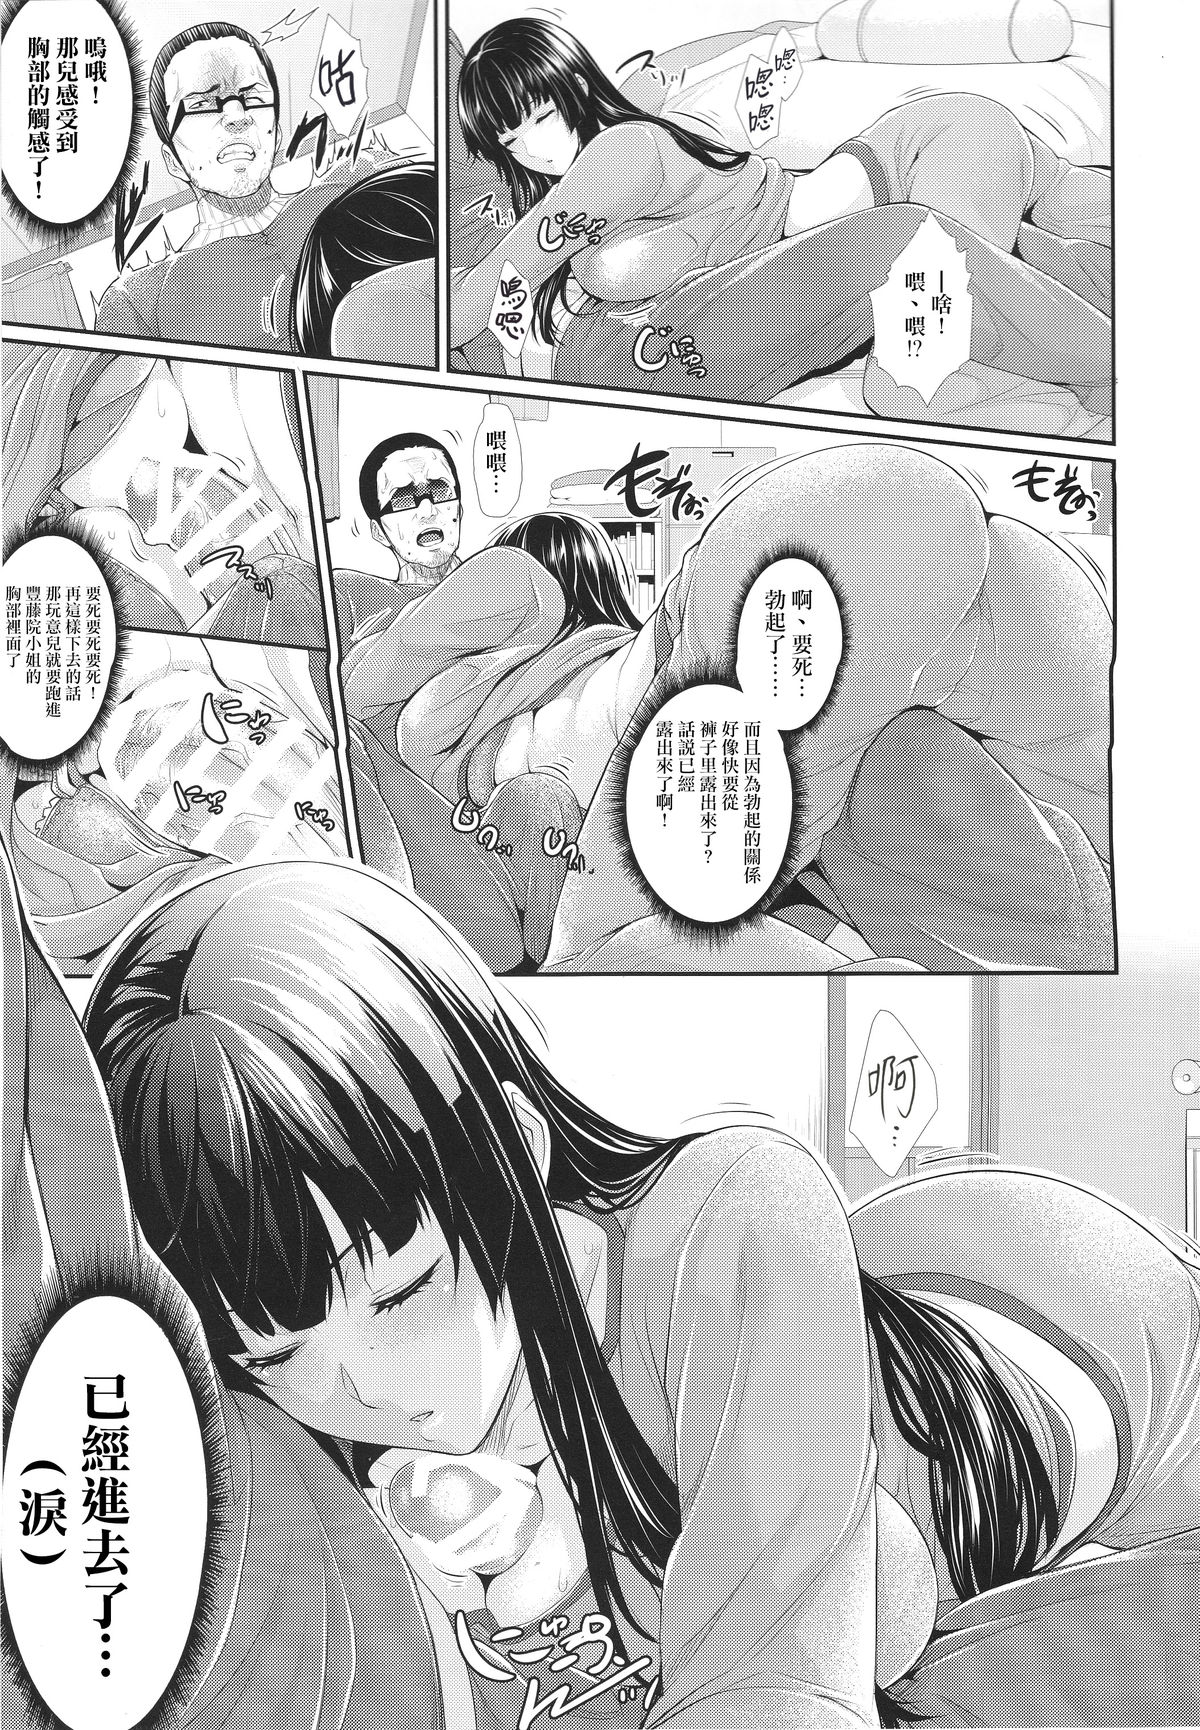 (C89) [Z.A.P. (Zucchini)] Yojouhan Monogatari [Chinese] [無毒漢化組] page 9 full